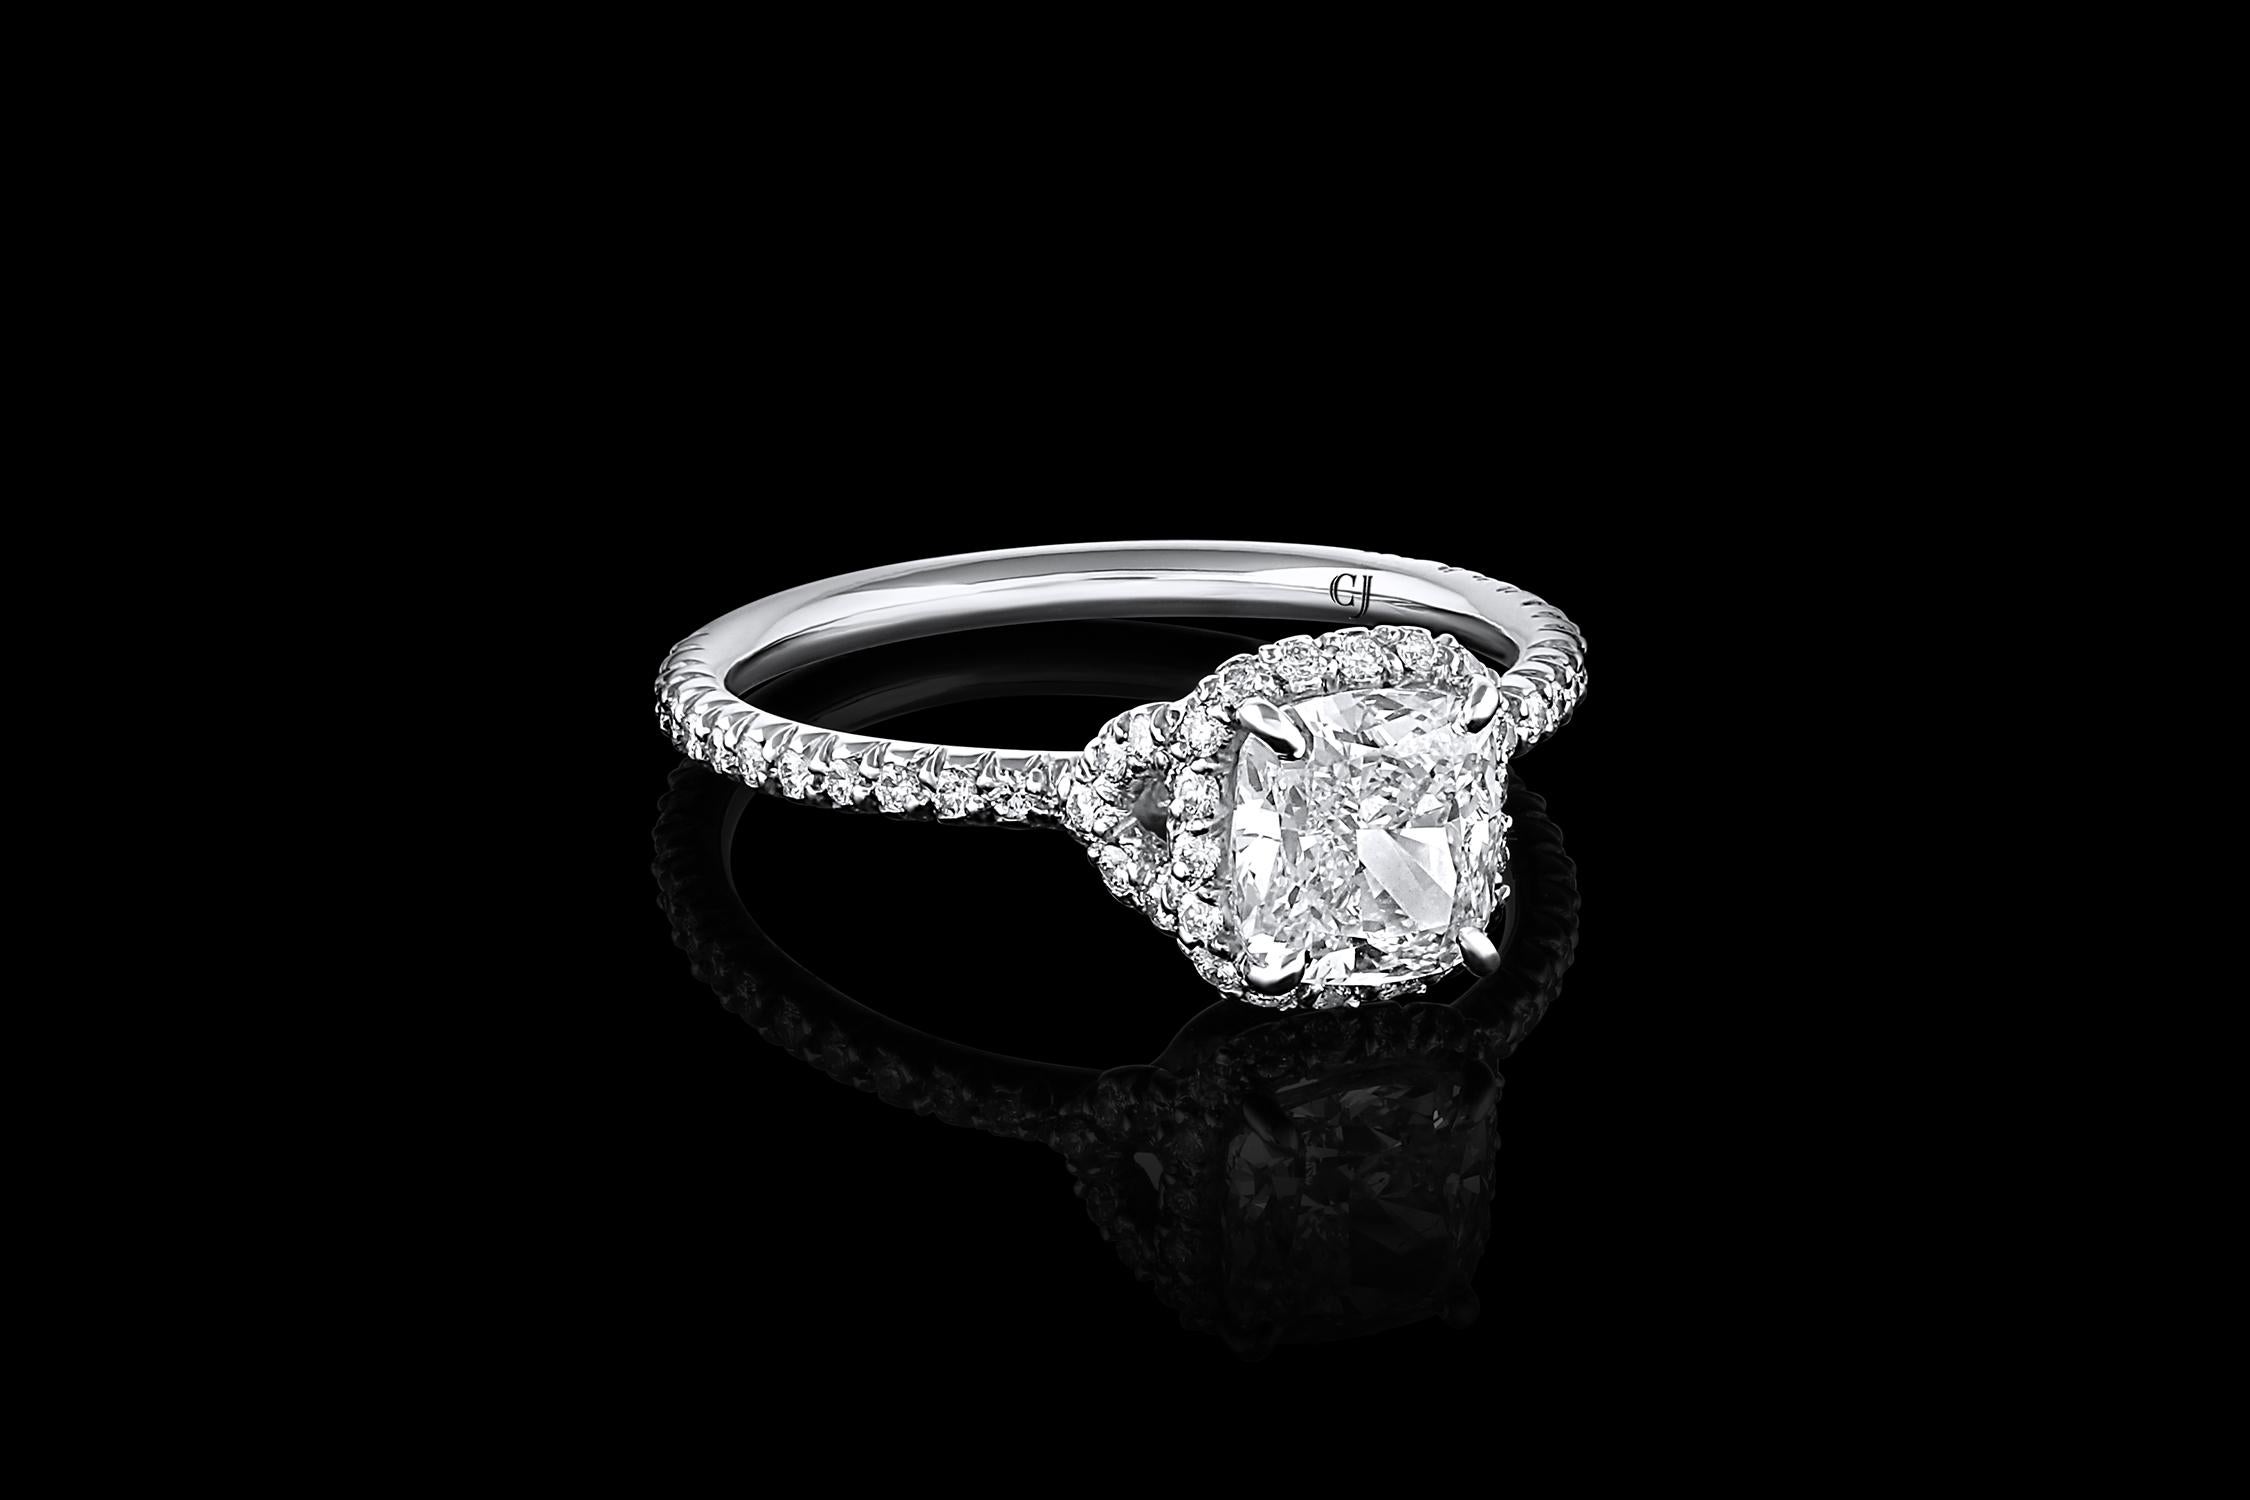 The Rivière Collection is exclusively designed and created in-house at CJ Charles Jewelers.

This elegant engagement ring is crafted of platinum and showcases a 1.20 carat cushion cut diamond with I color and SI1 clarity. It features a diamond halo